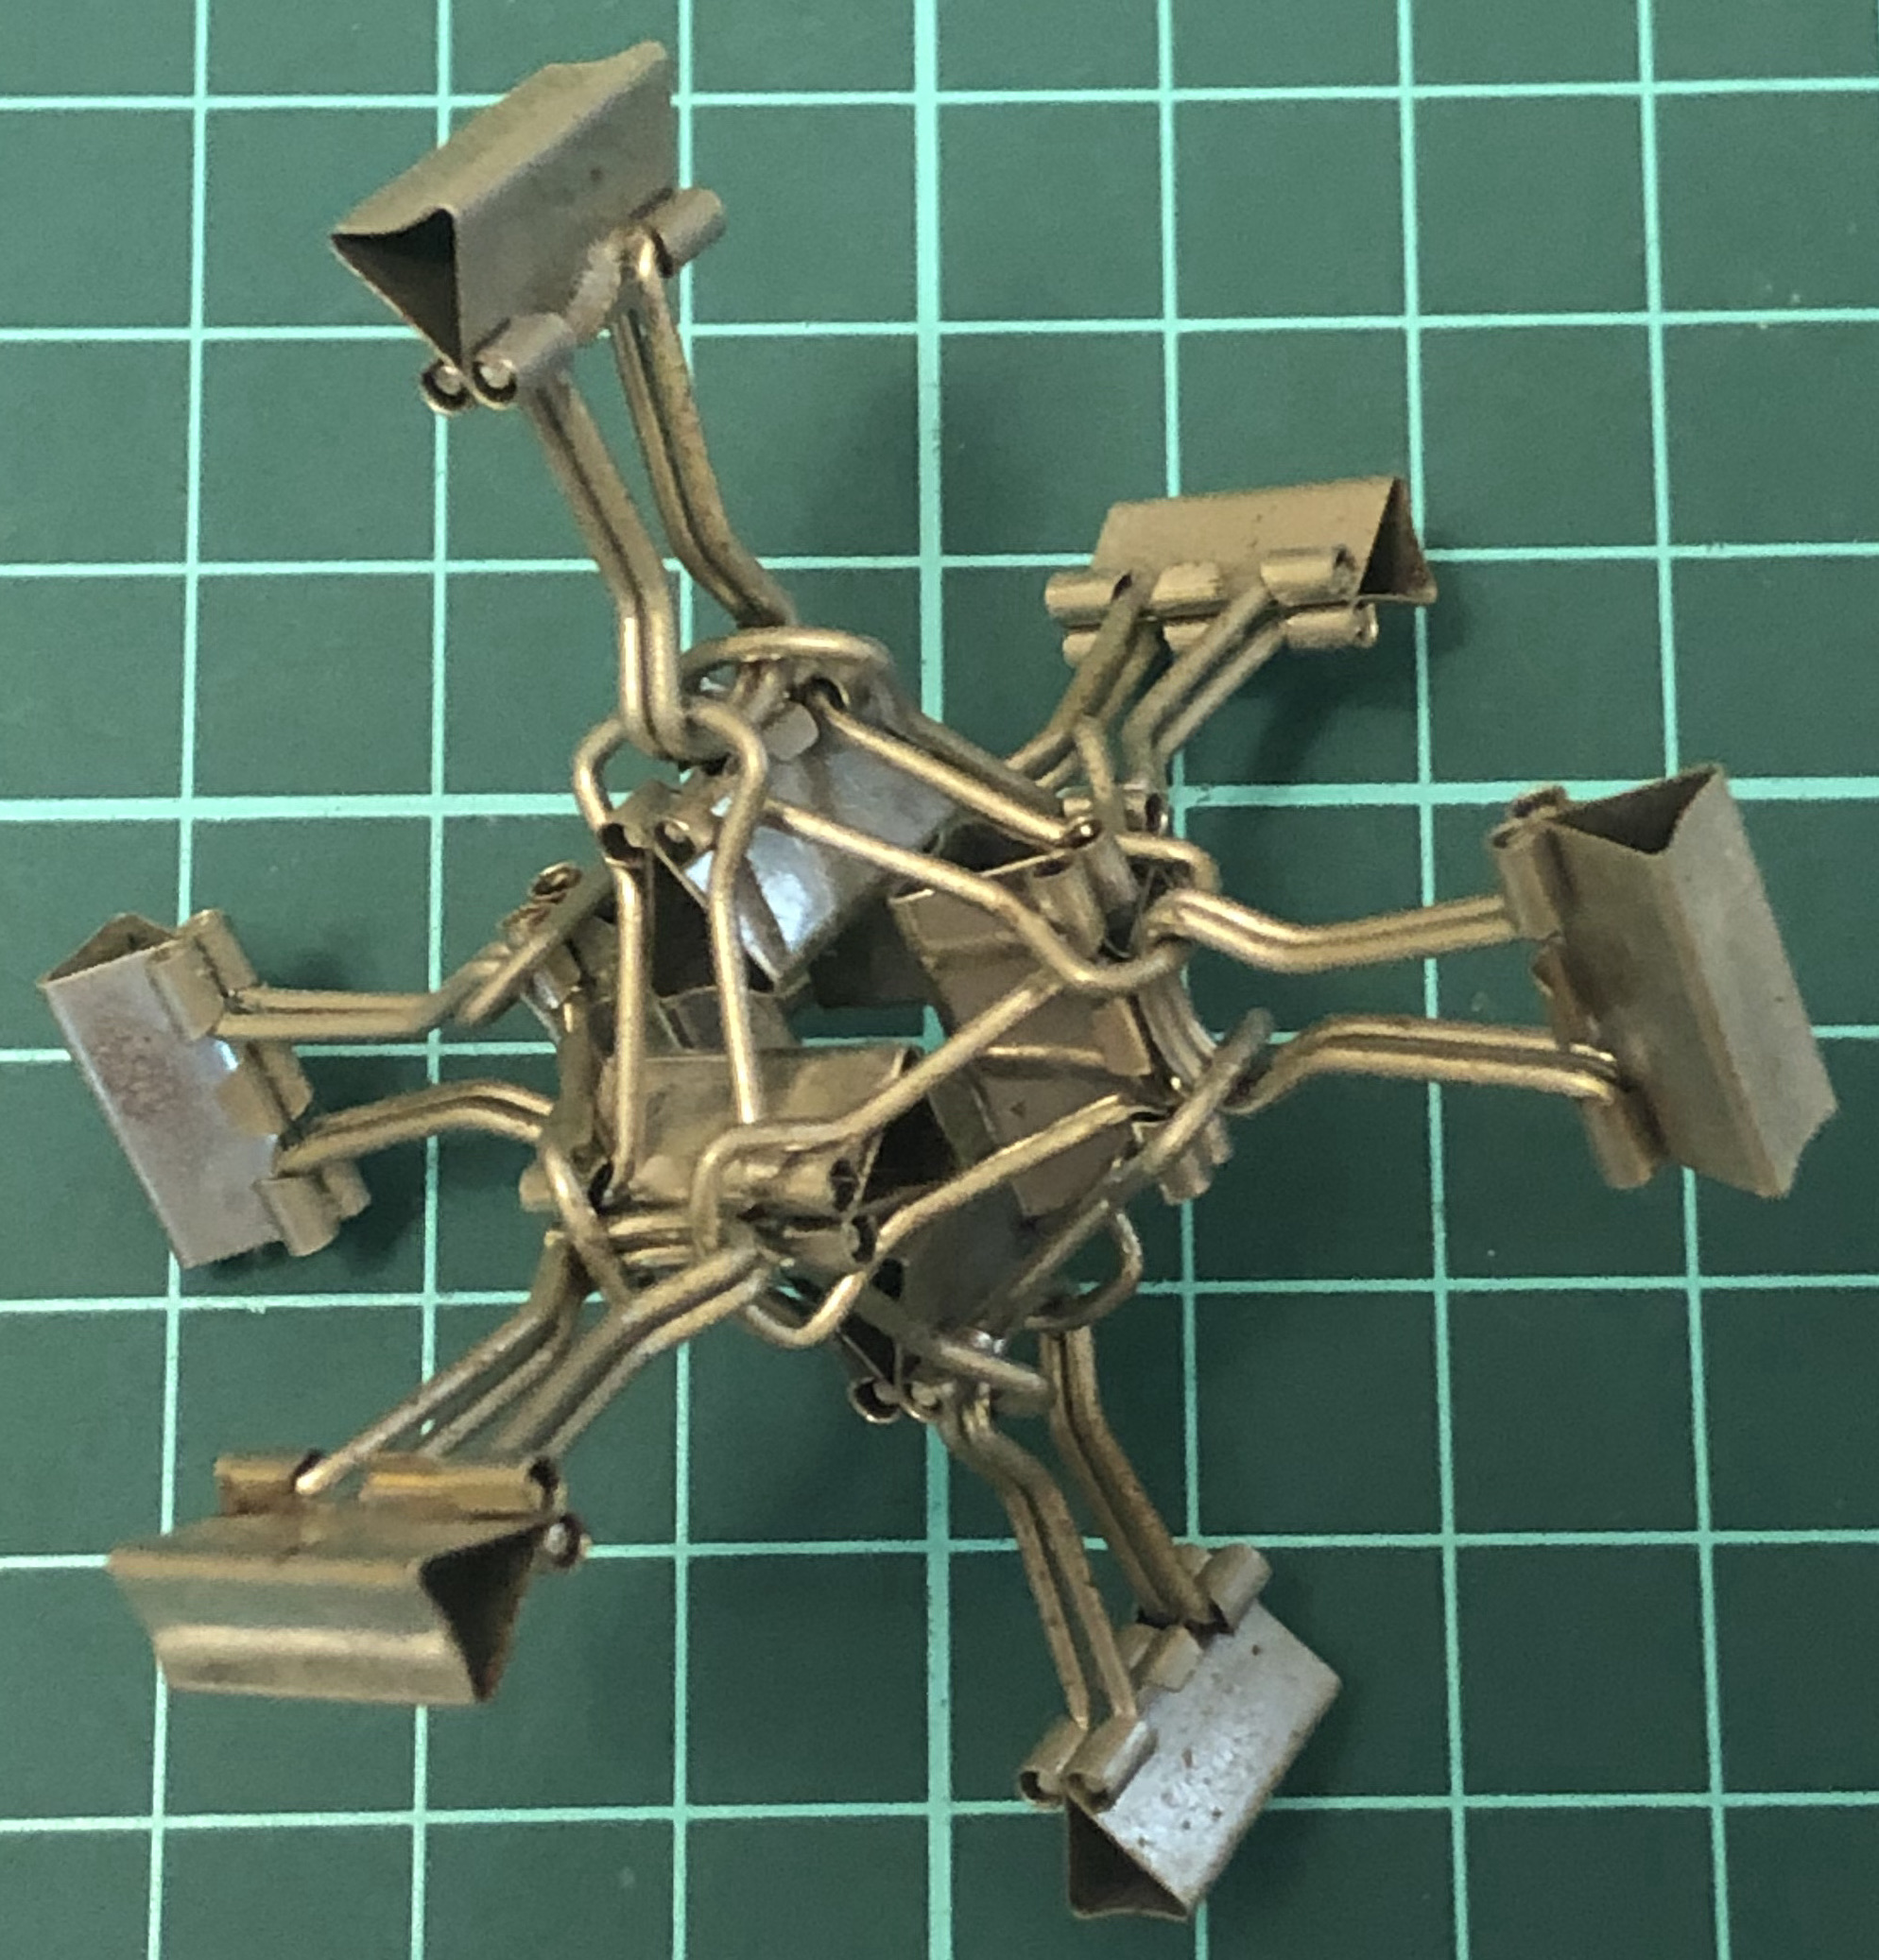 6 binder clips form an octahedron, another 6 form tentacles